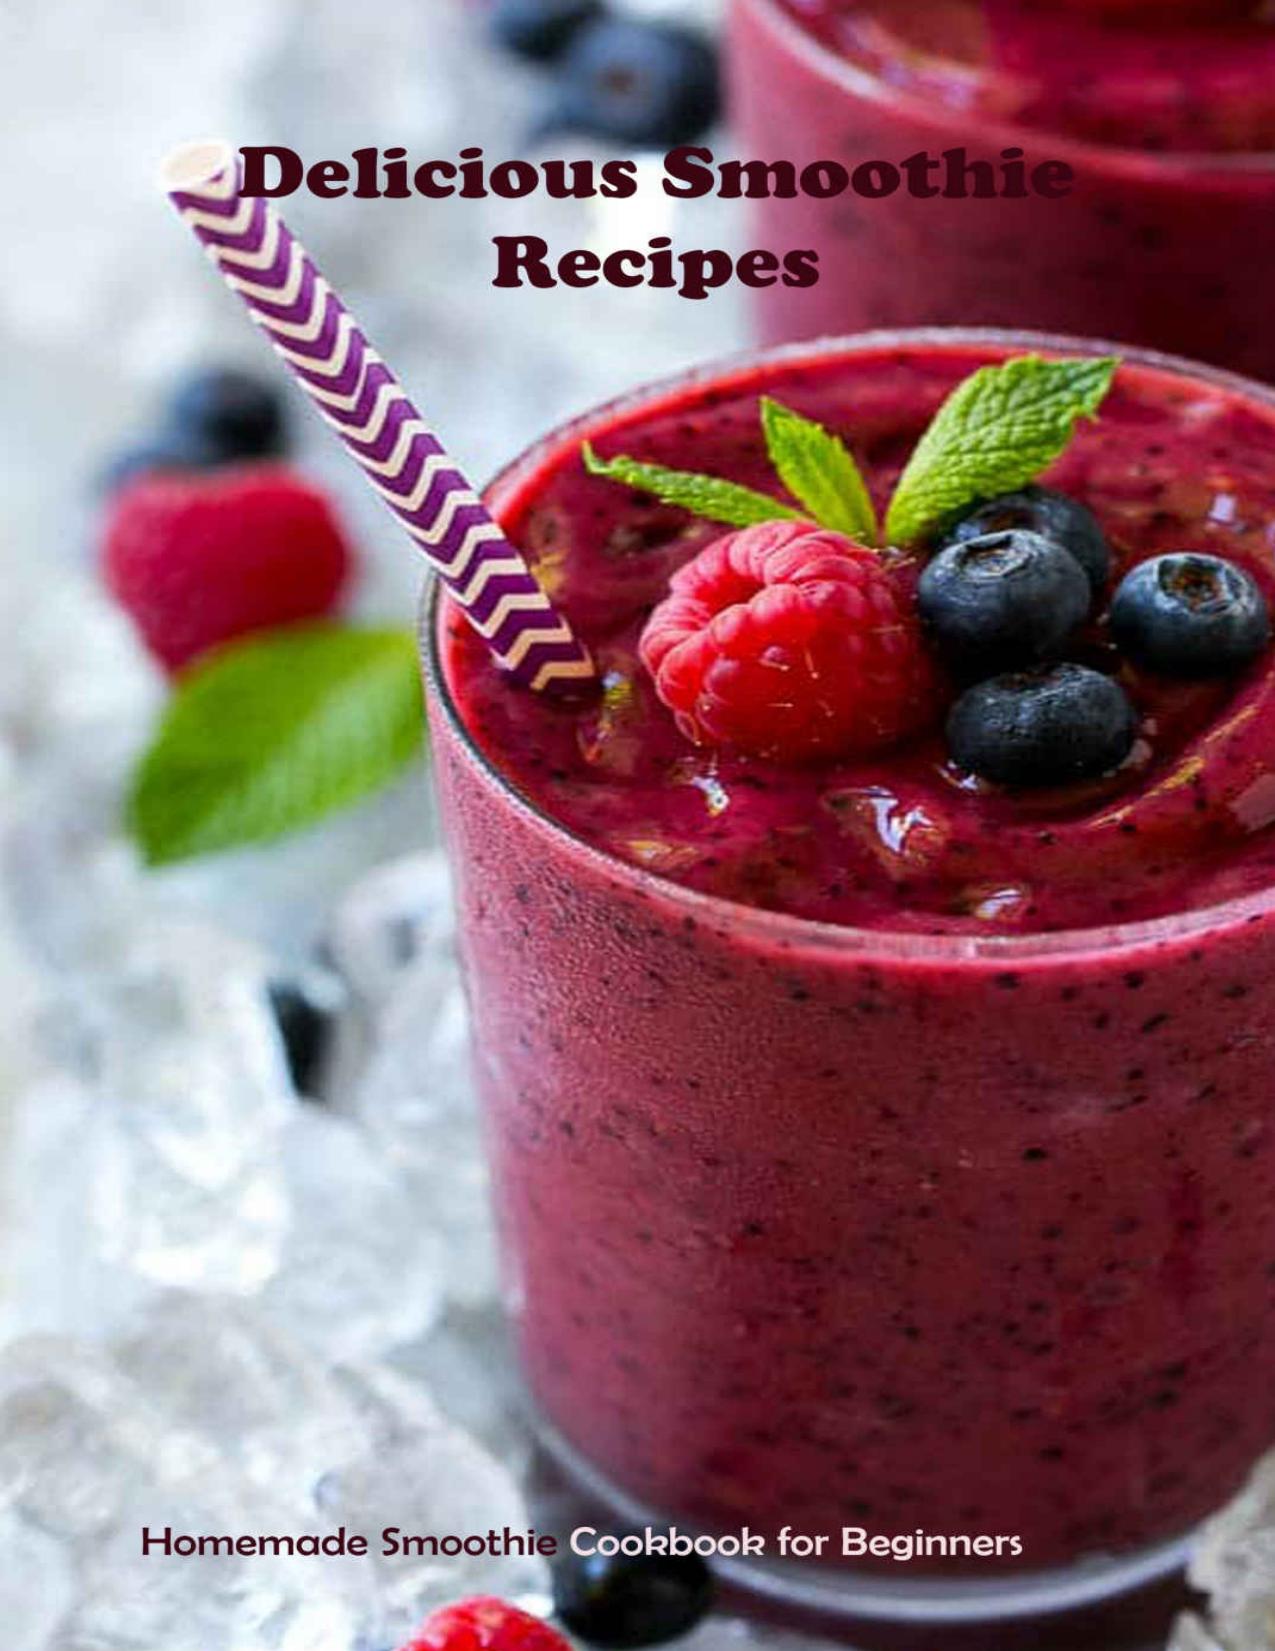 Delicious Smoothie Recipes: Homemade Smoothie Cookbook for Beginners: Smoothies Recipe Book by WAGSTAFF DONNA